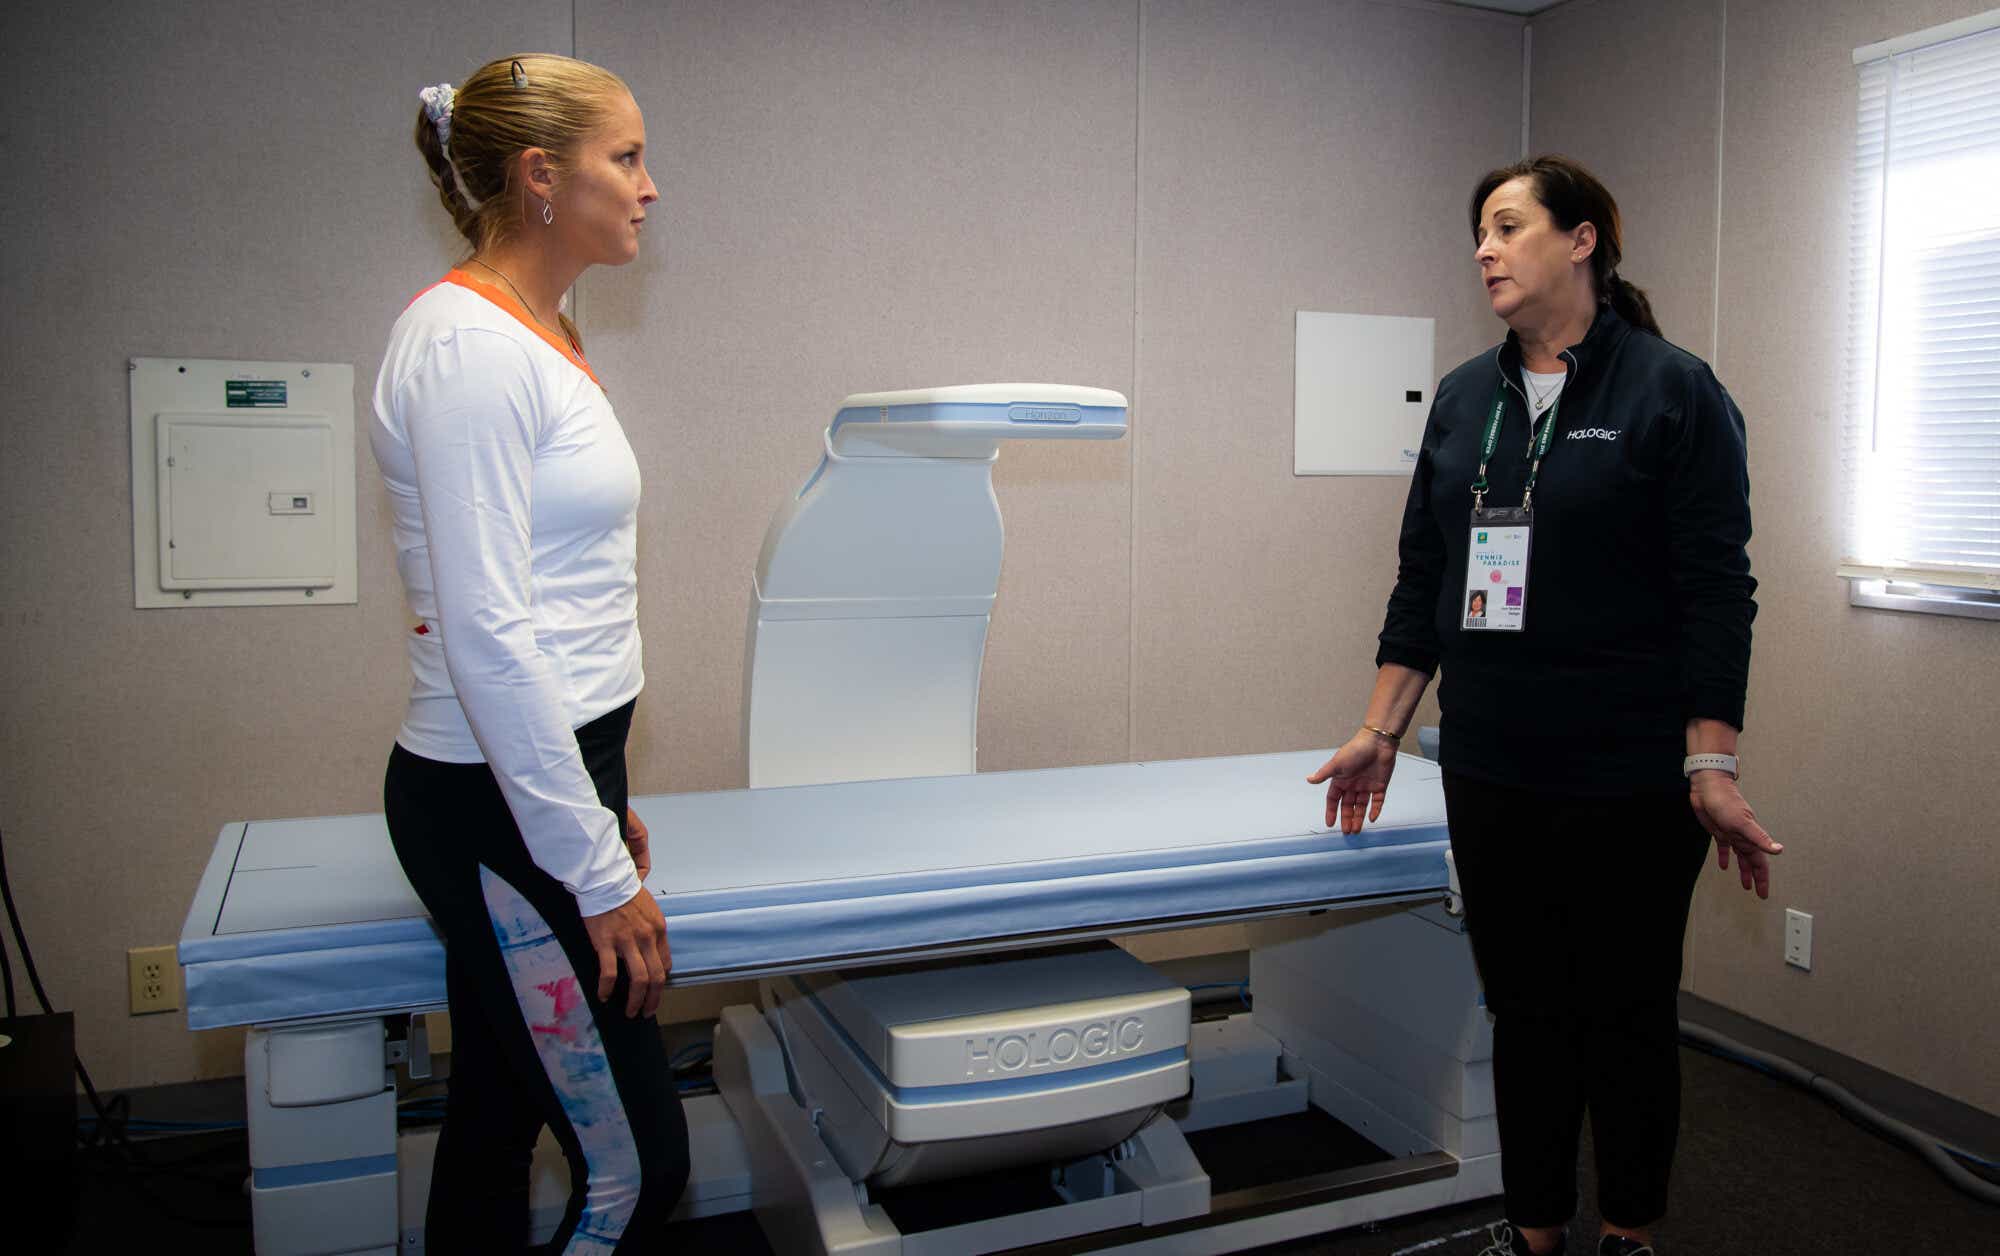 WTA player Shelby Rogers discussing a DXA scan as part of her physical at the tennis tournament in Indian Wells, California in March 2022.